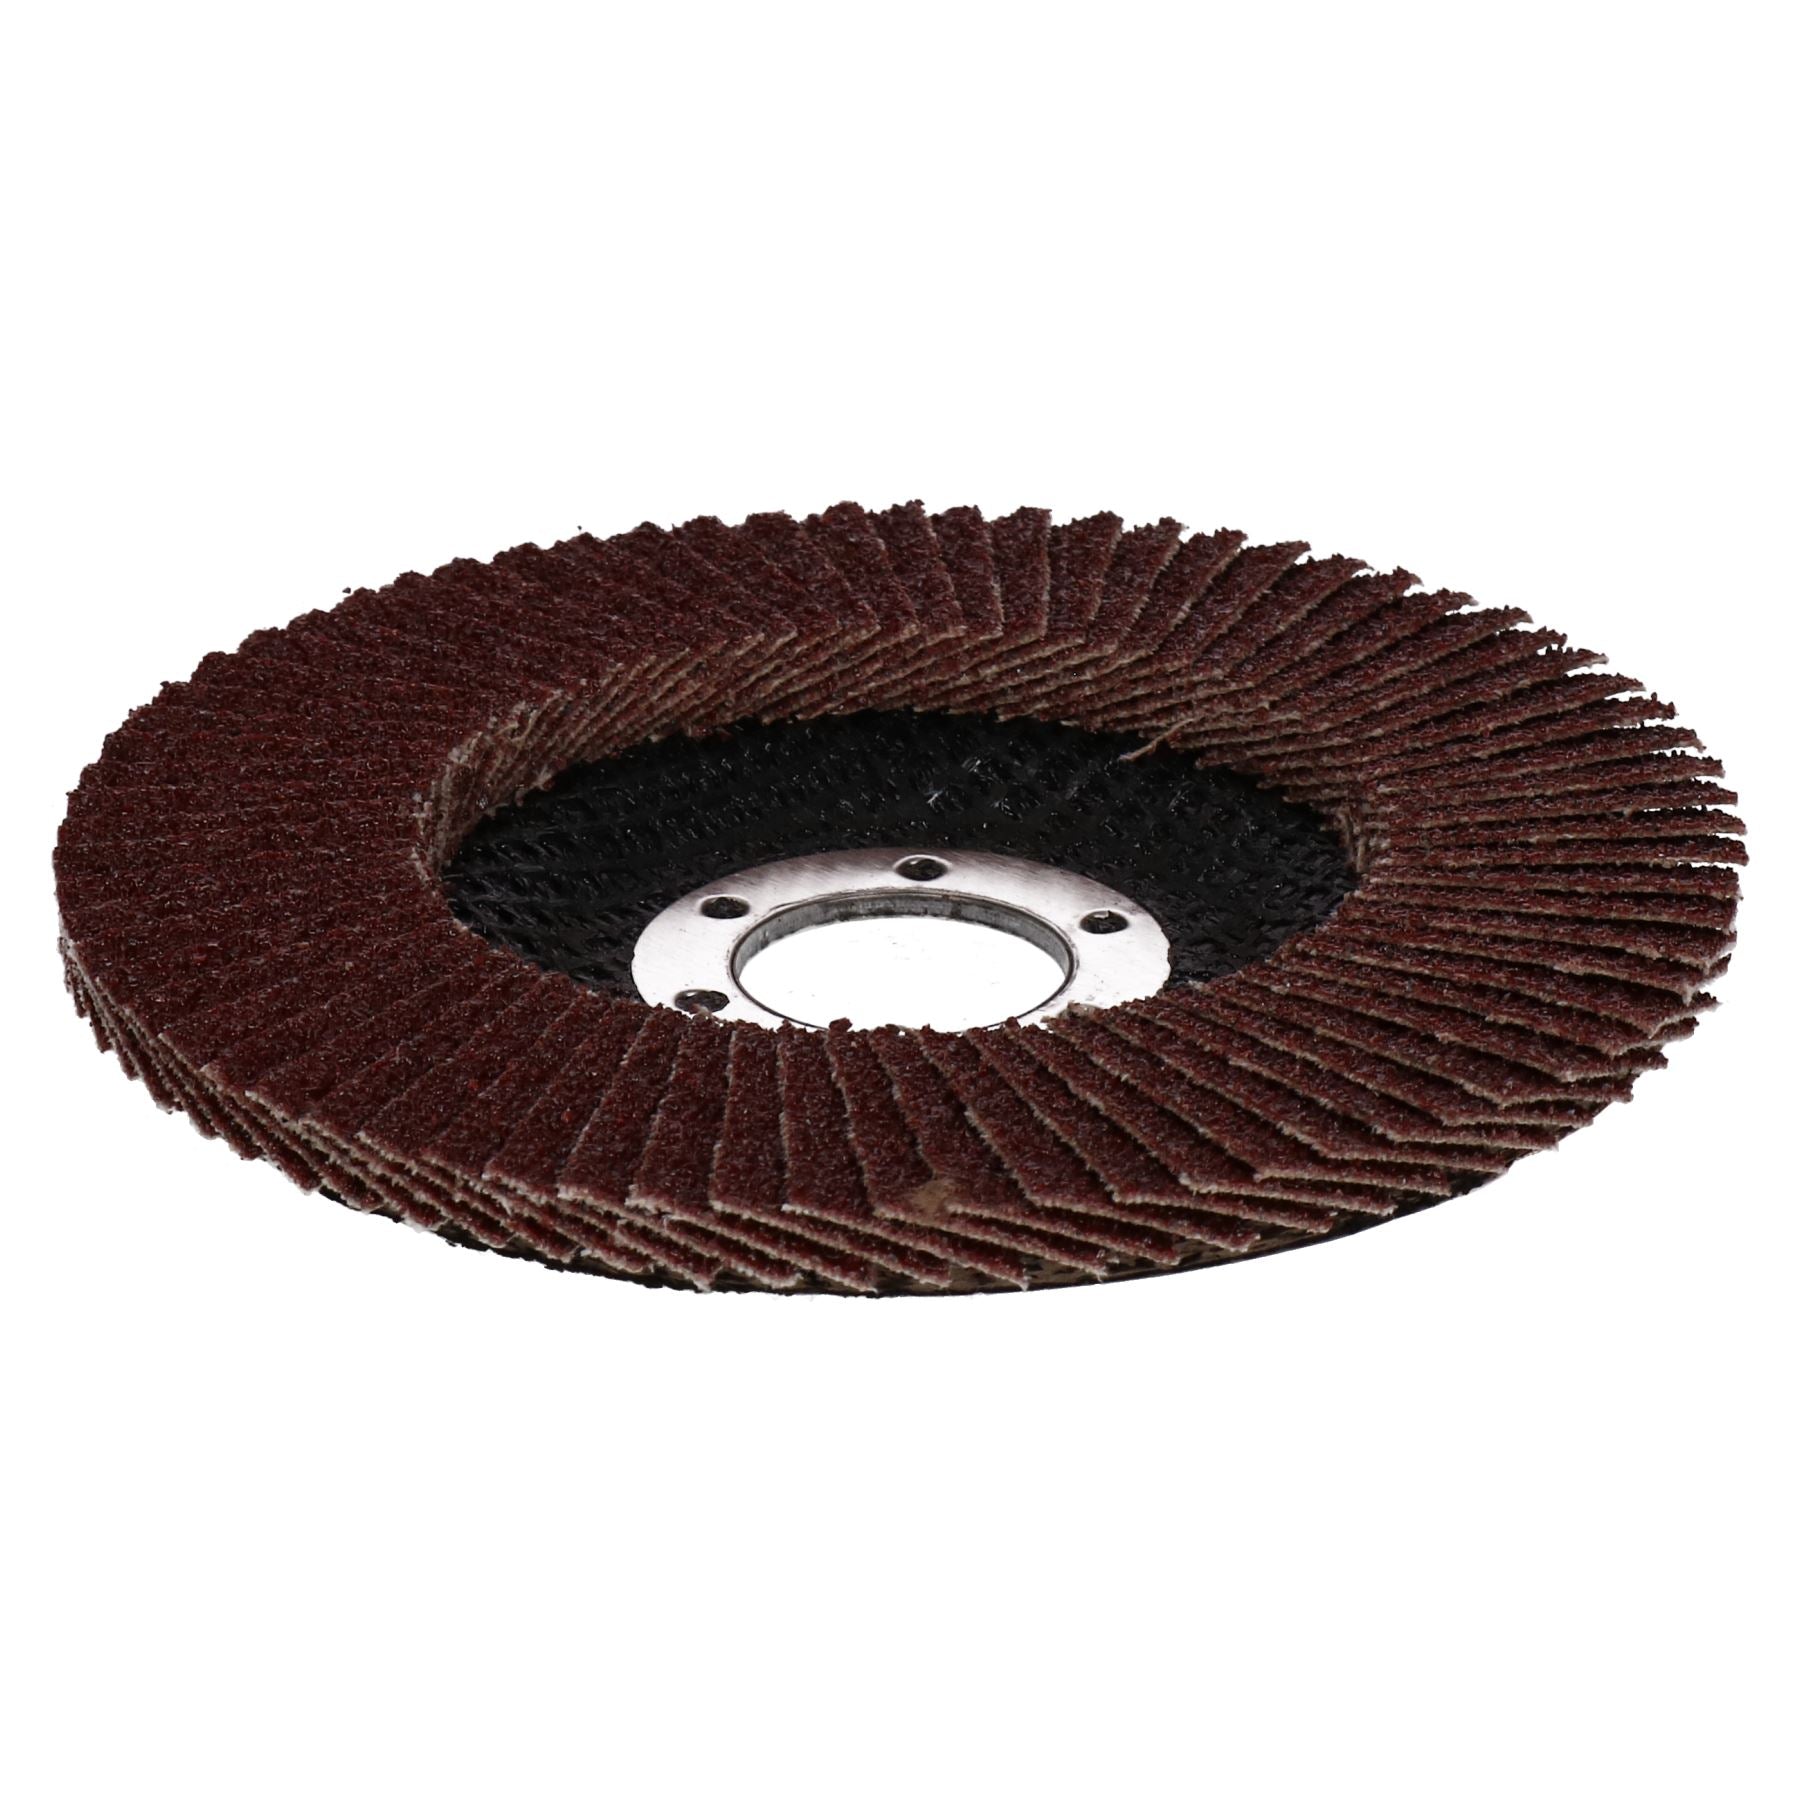 40 / 60 / 80 Grit Flap Discs Sanding Grinding For 4-1/2" Angle Grinders